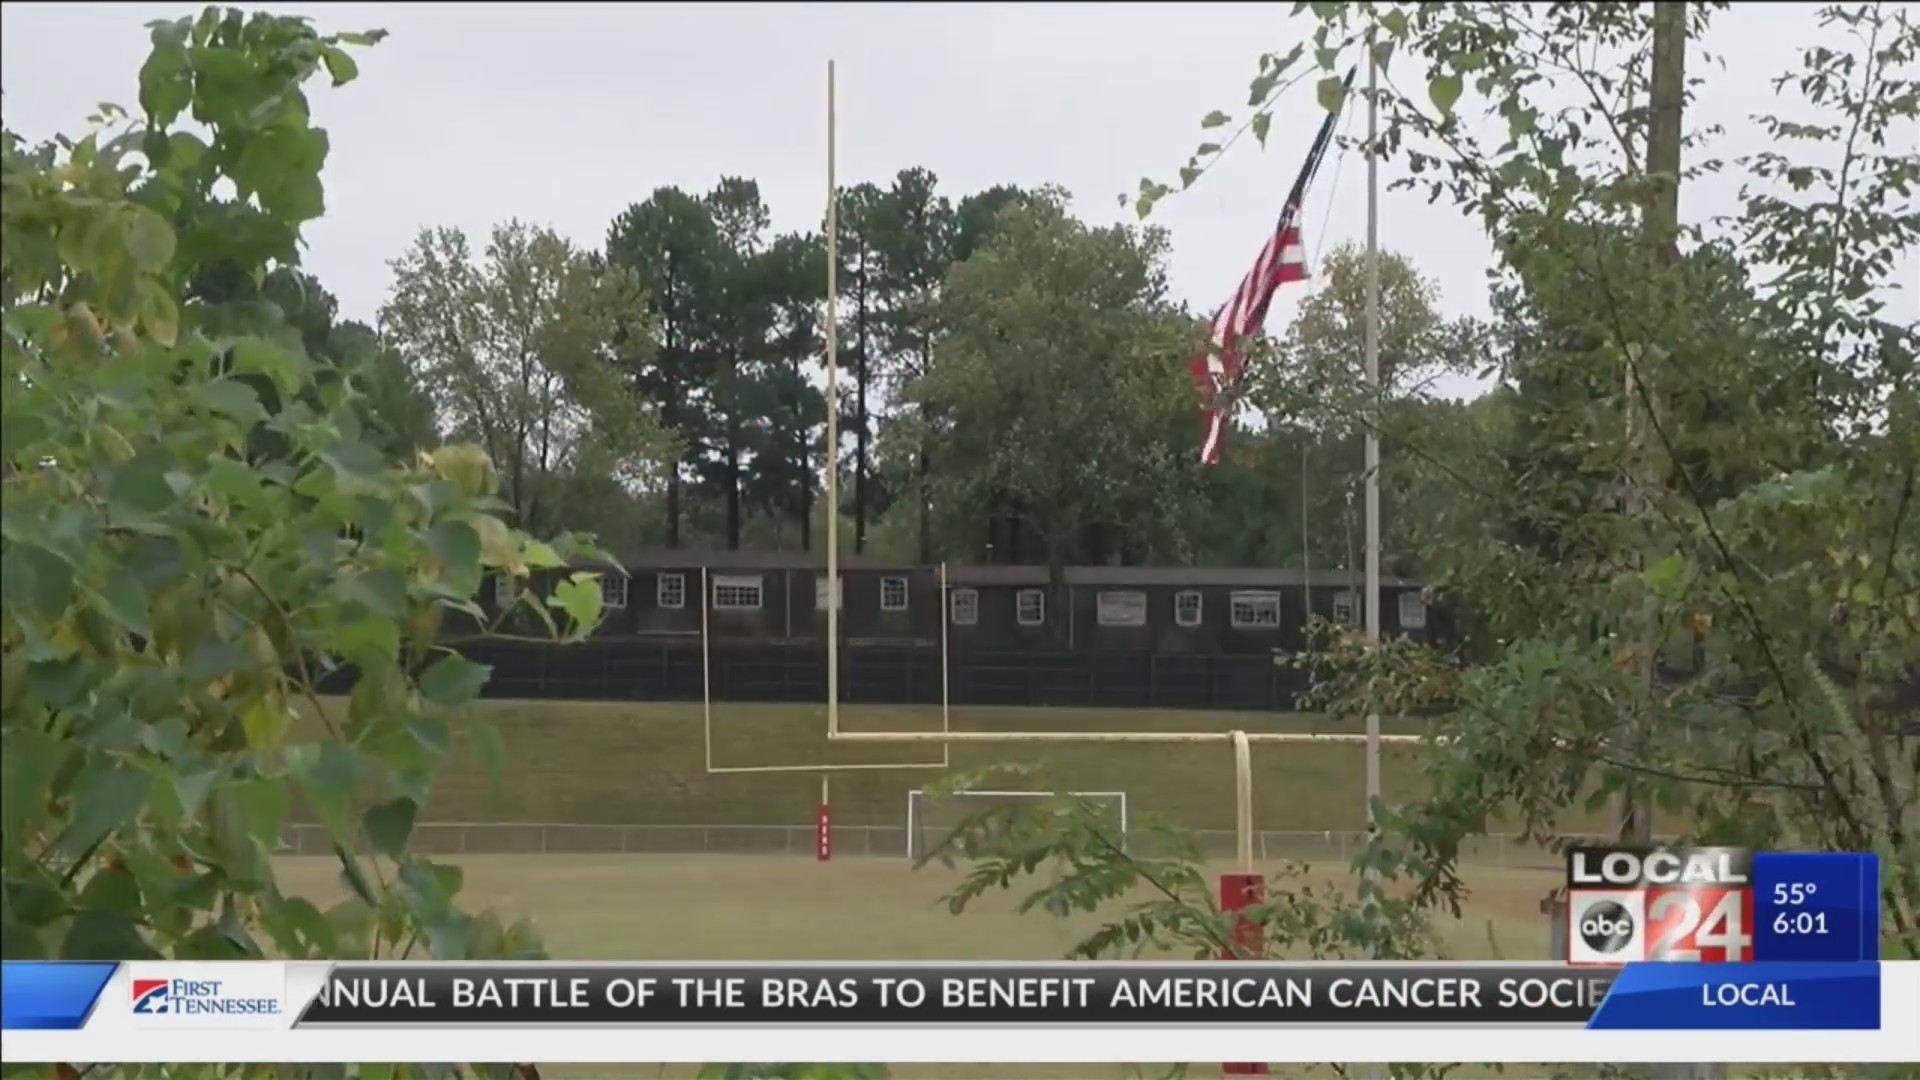 Friday's Bolton vs. Craigmont football game at Raleigh-Egypt rescheduled due to safety concerns